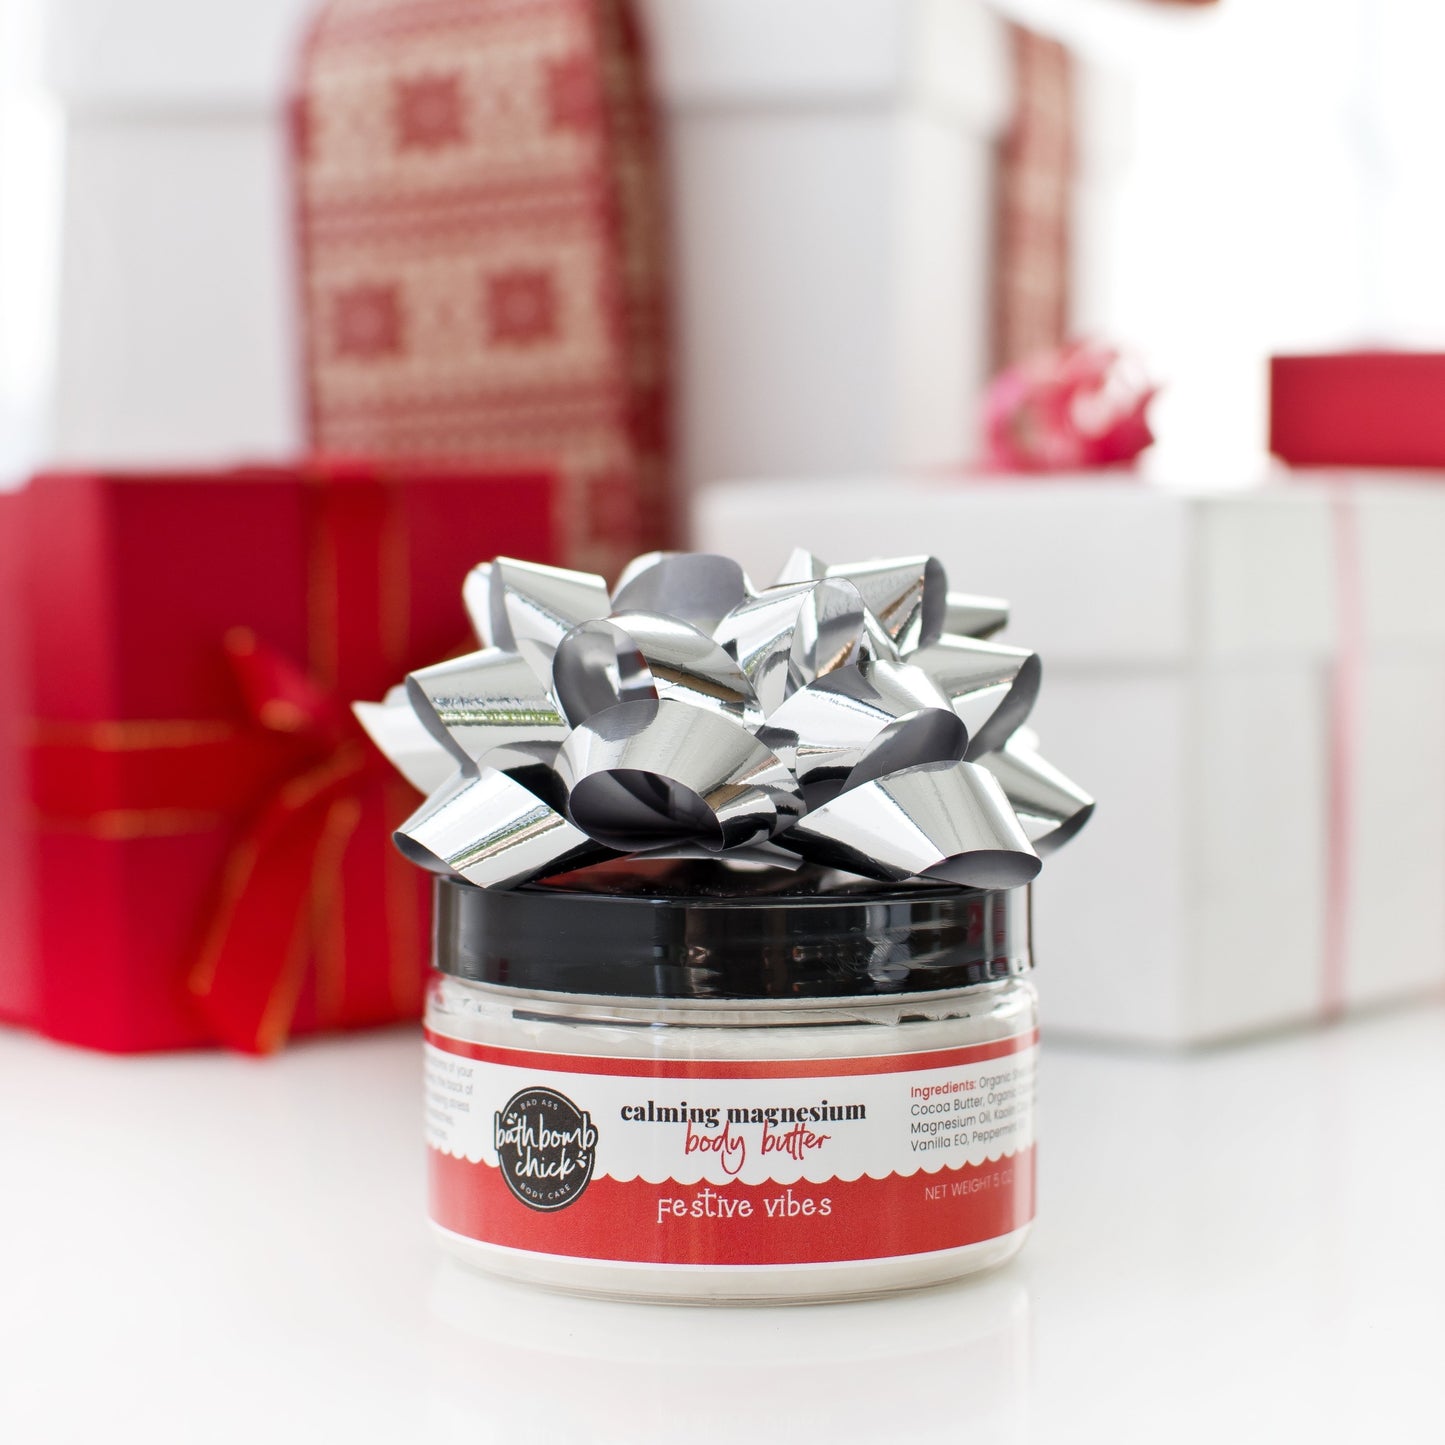 FESTIVE VIBES - Calming Magnesium Body Butter